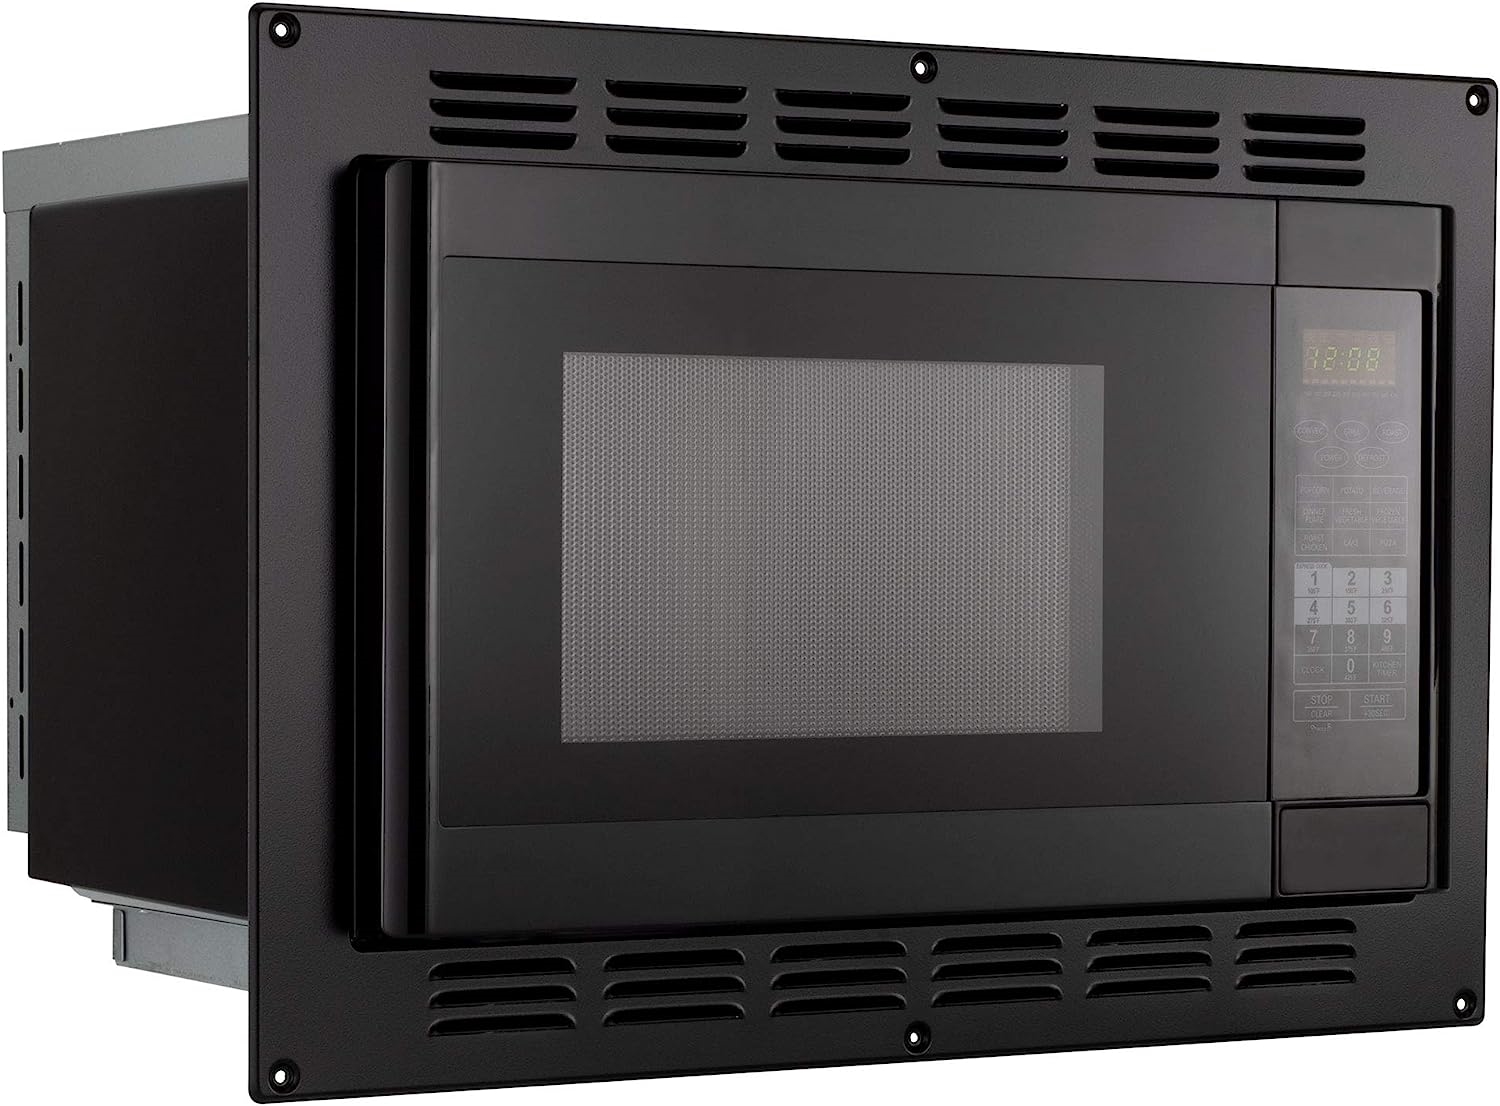 Best Microwave Convection Oven for 2023 | DeviceDaily.com